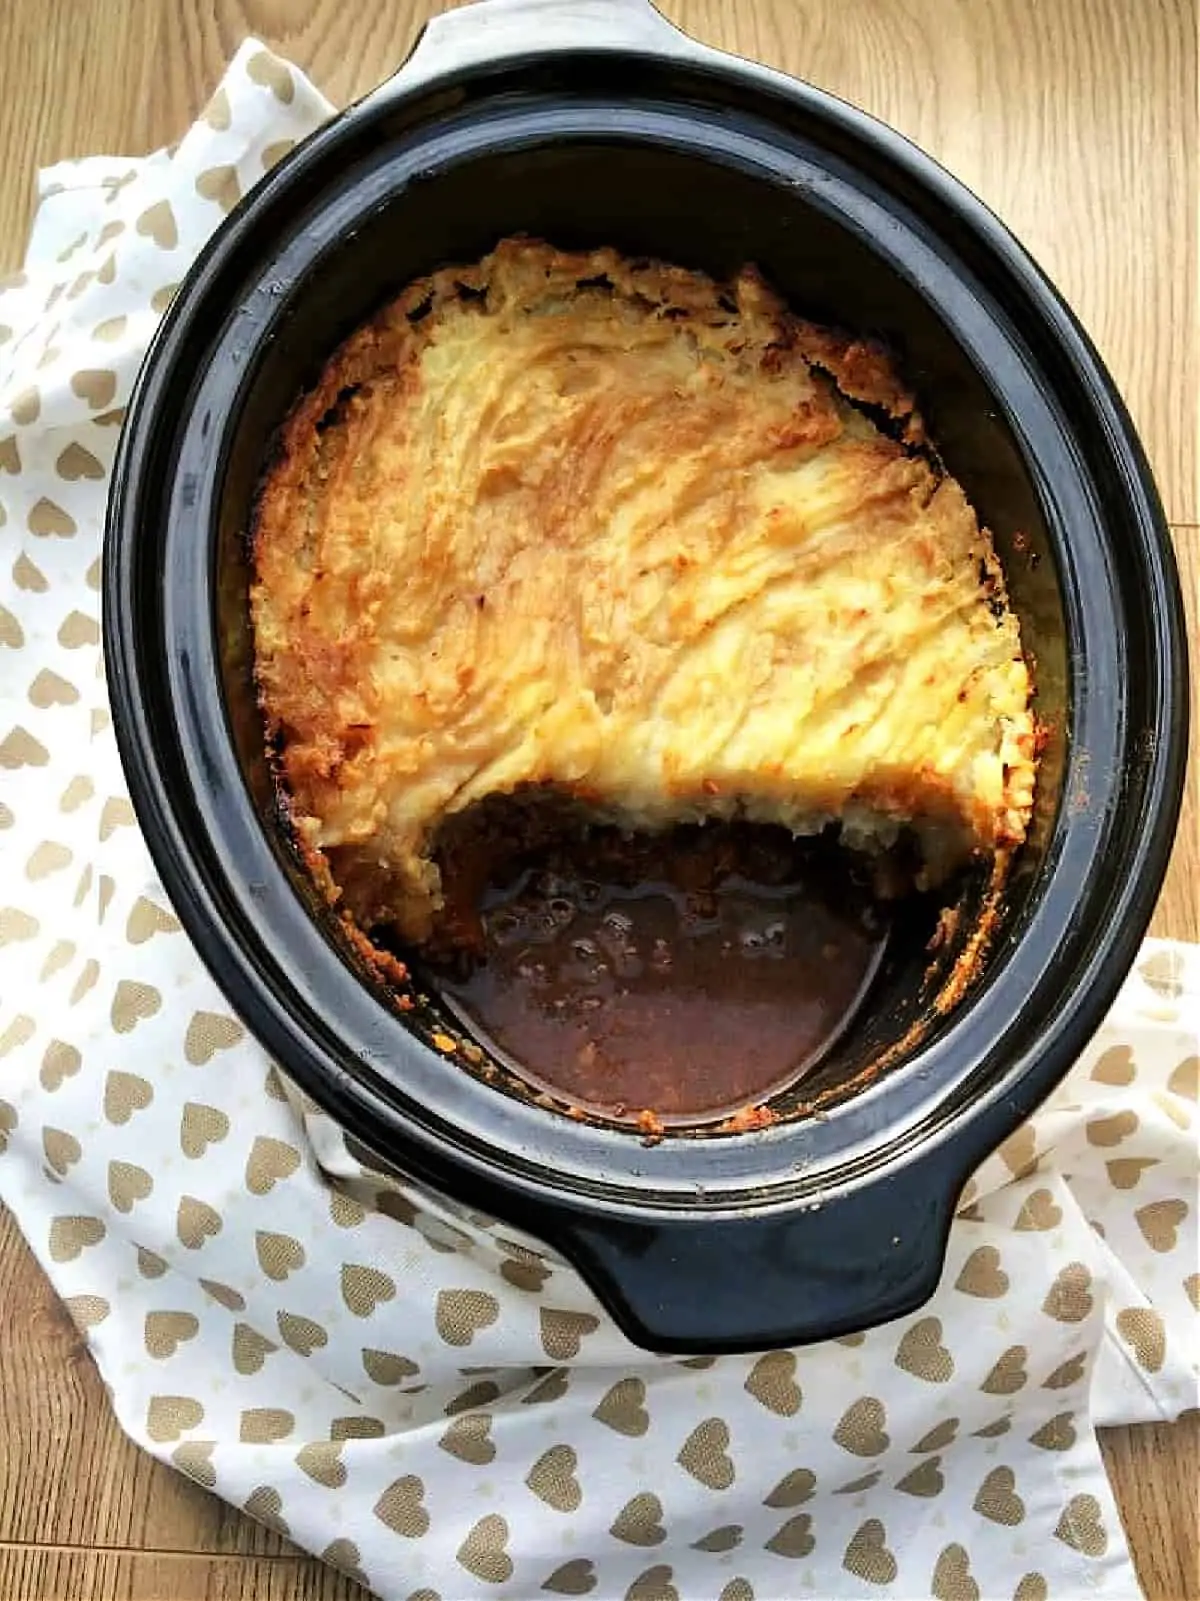 Overhead view of cottage pie with mashed potato topping in slow cooker pot.